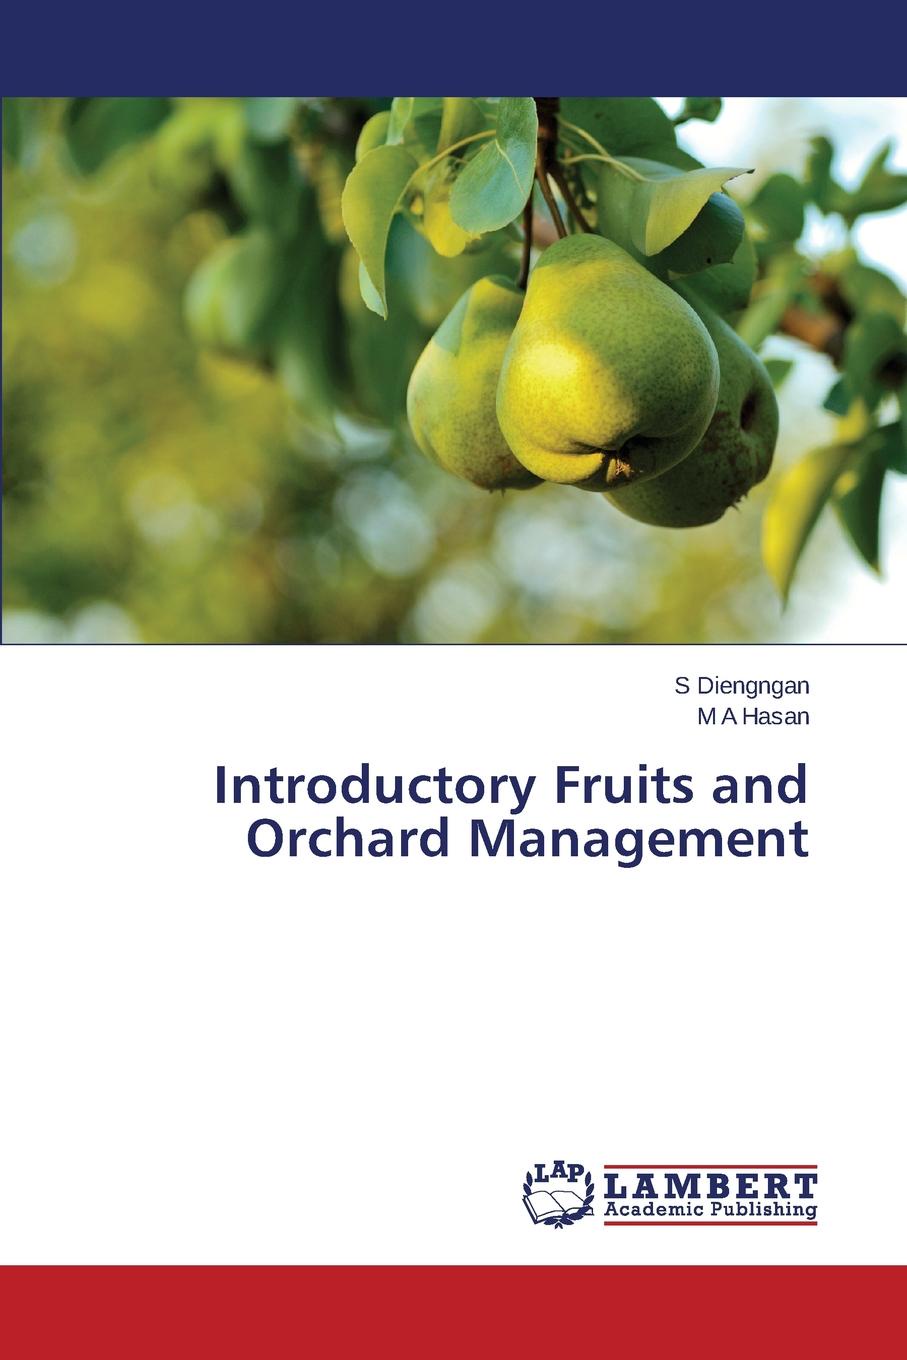 Diengngan S, Hasan M A Introductory Fruits and Orchard Management